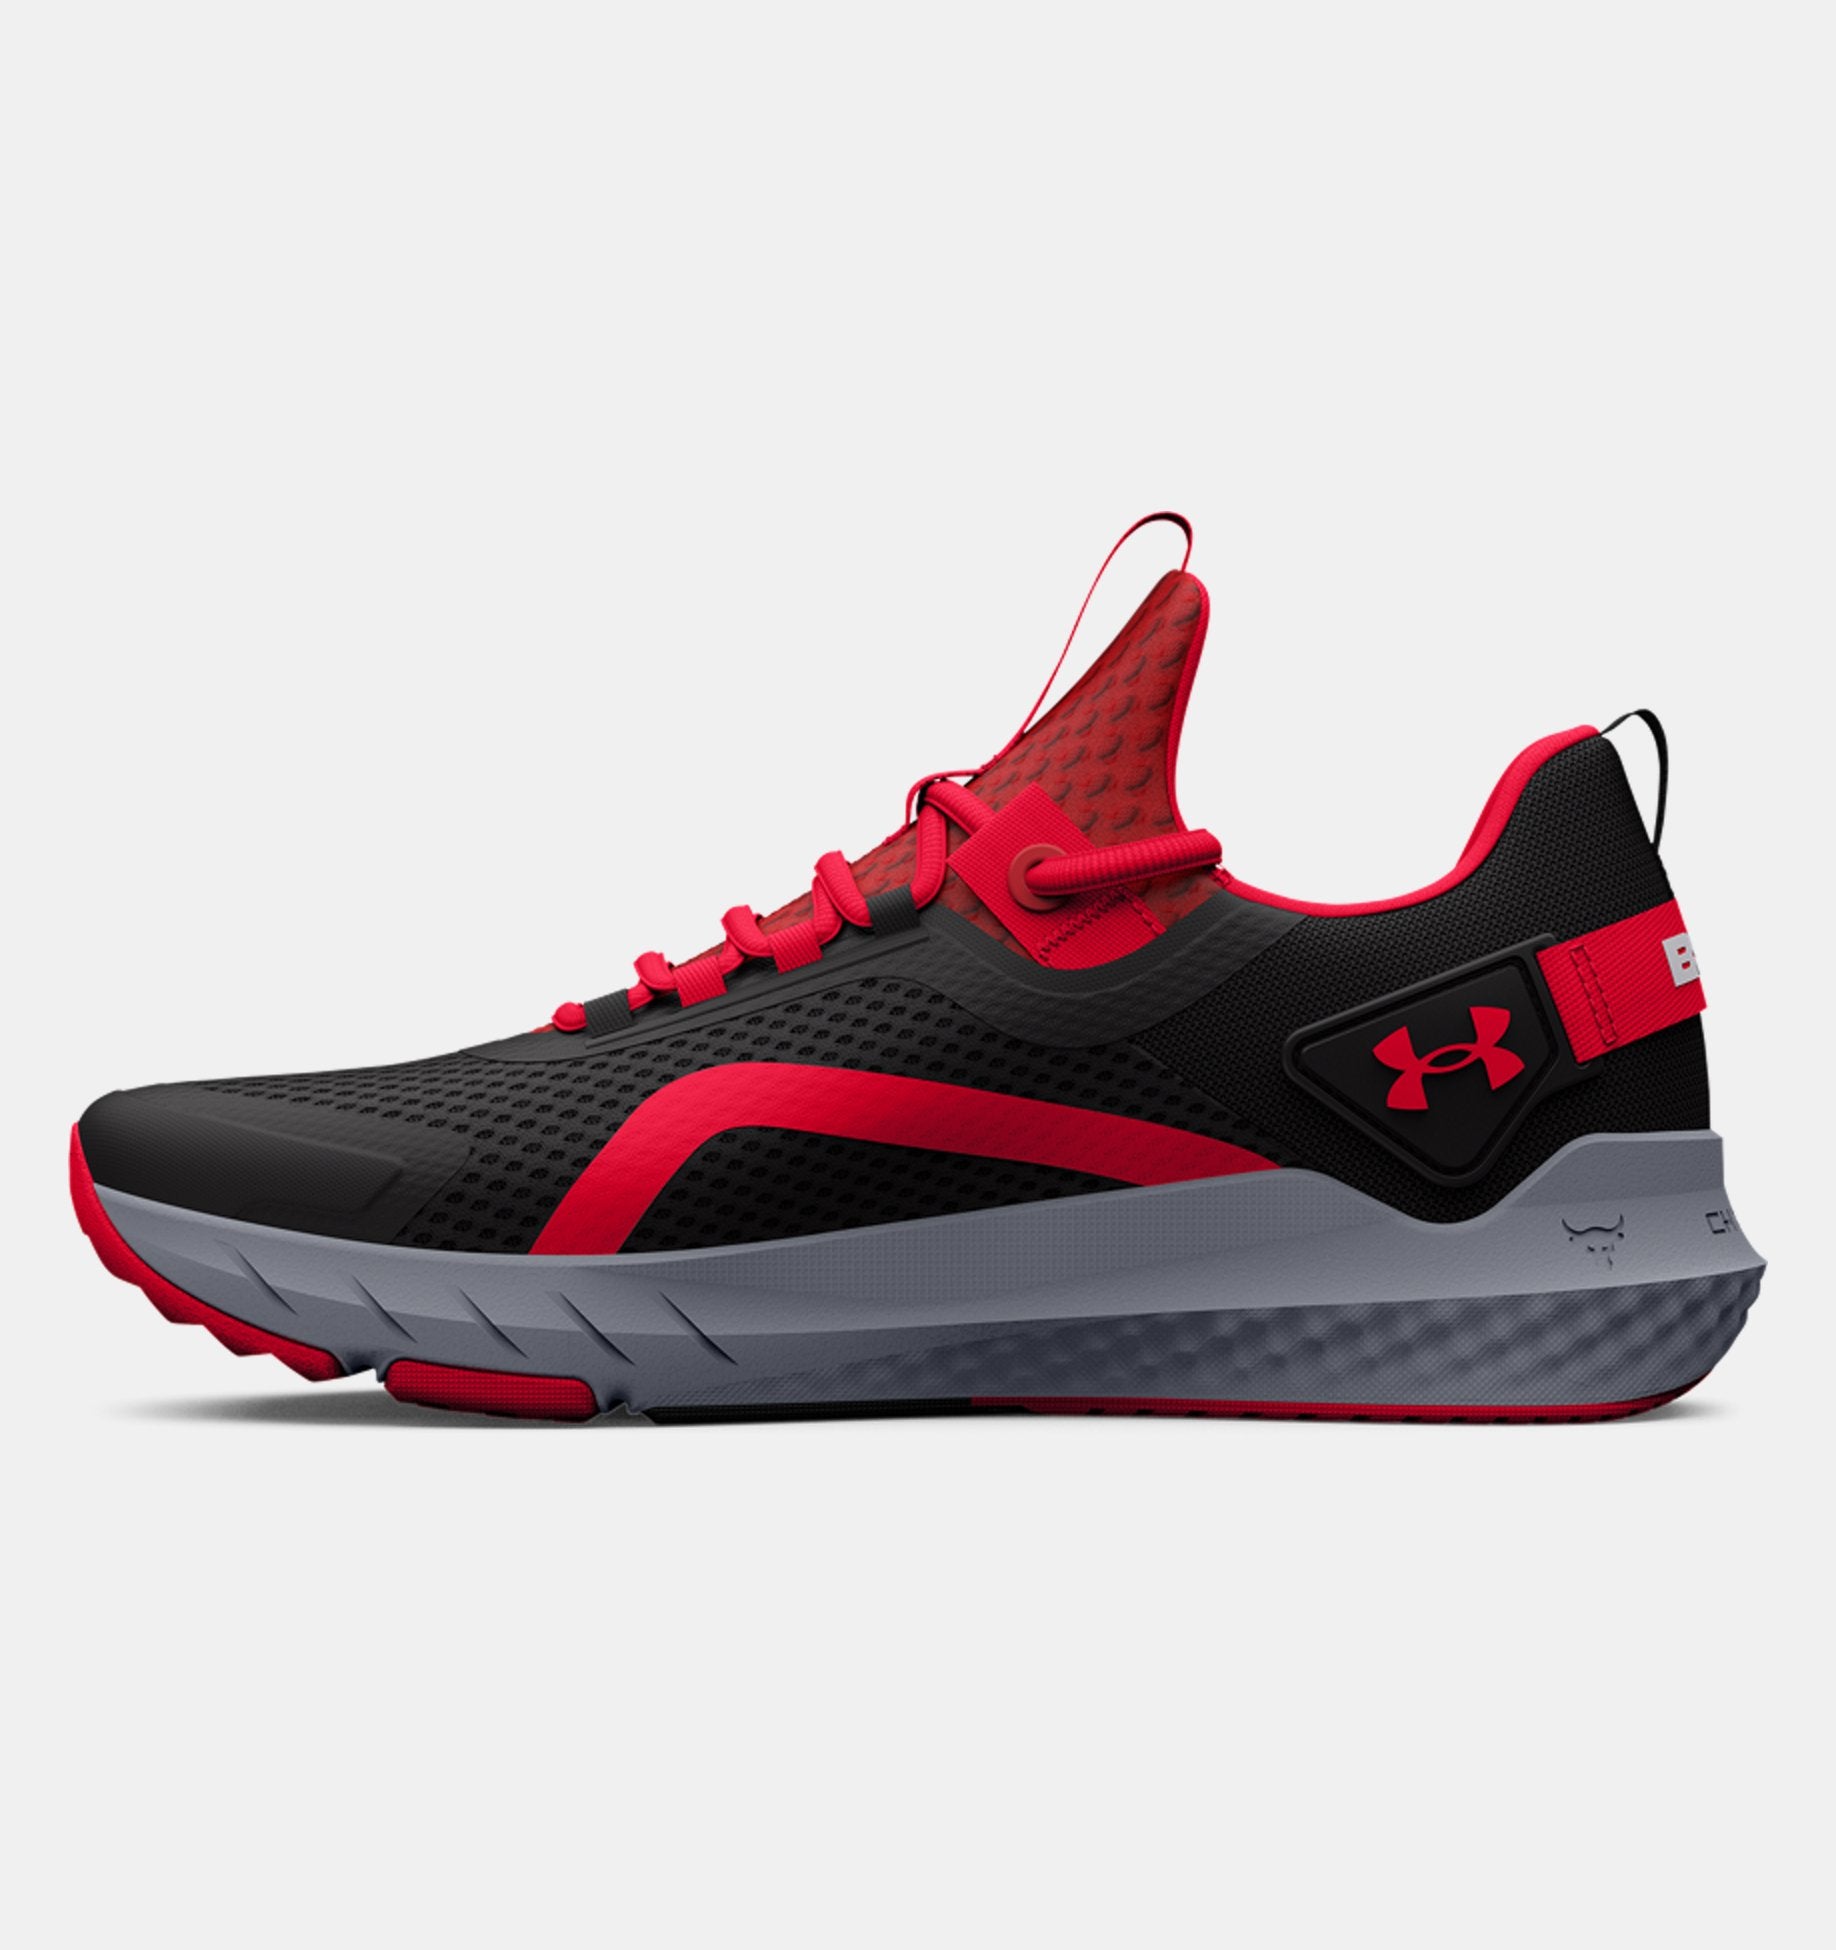 Under Armour, Project Rock BSR 3 Men's Training Shoes, Training Shoes